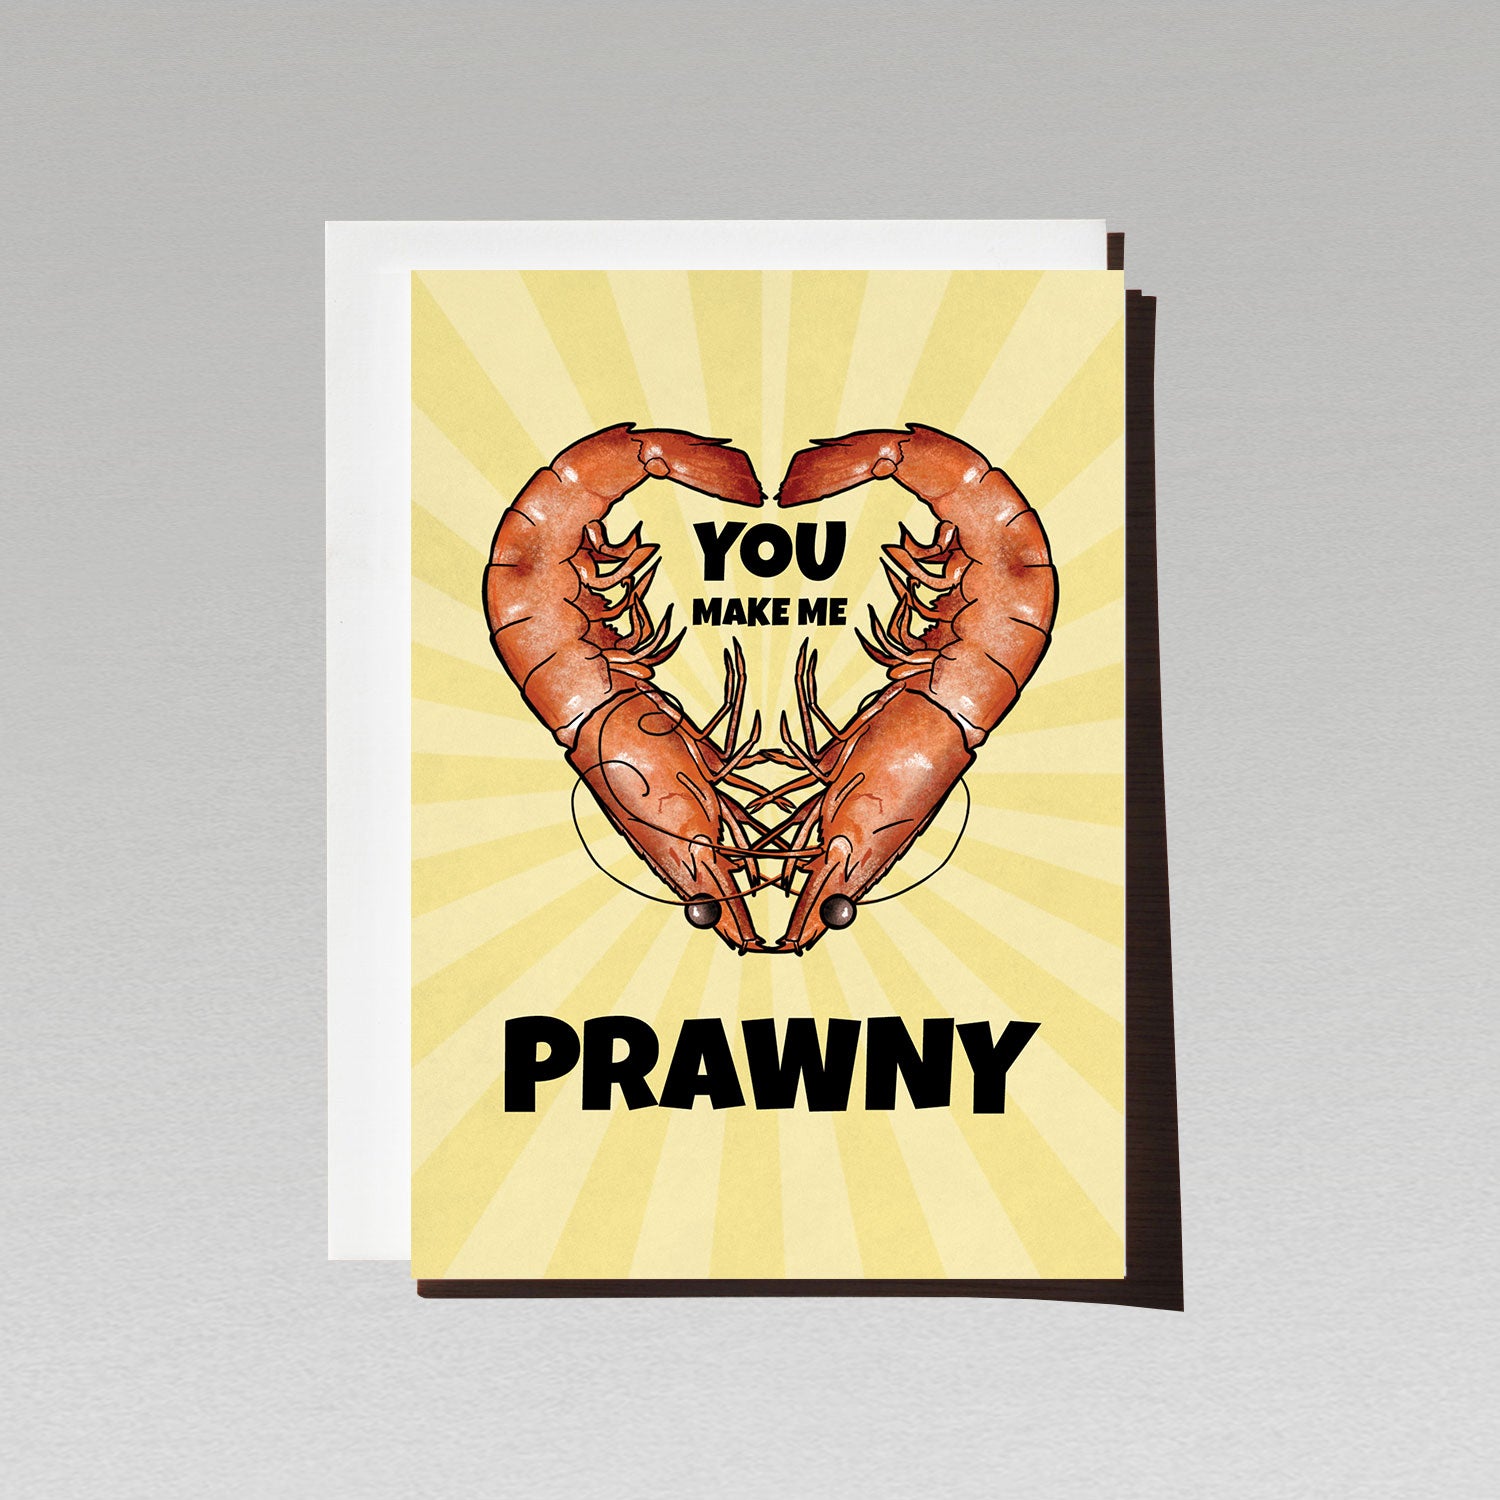 Two prawns facing each other to make a love heart shape on a pale yellow background with text You make me prawny